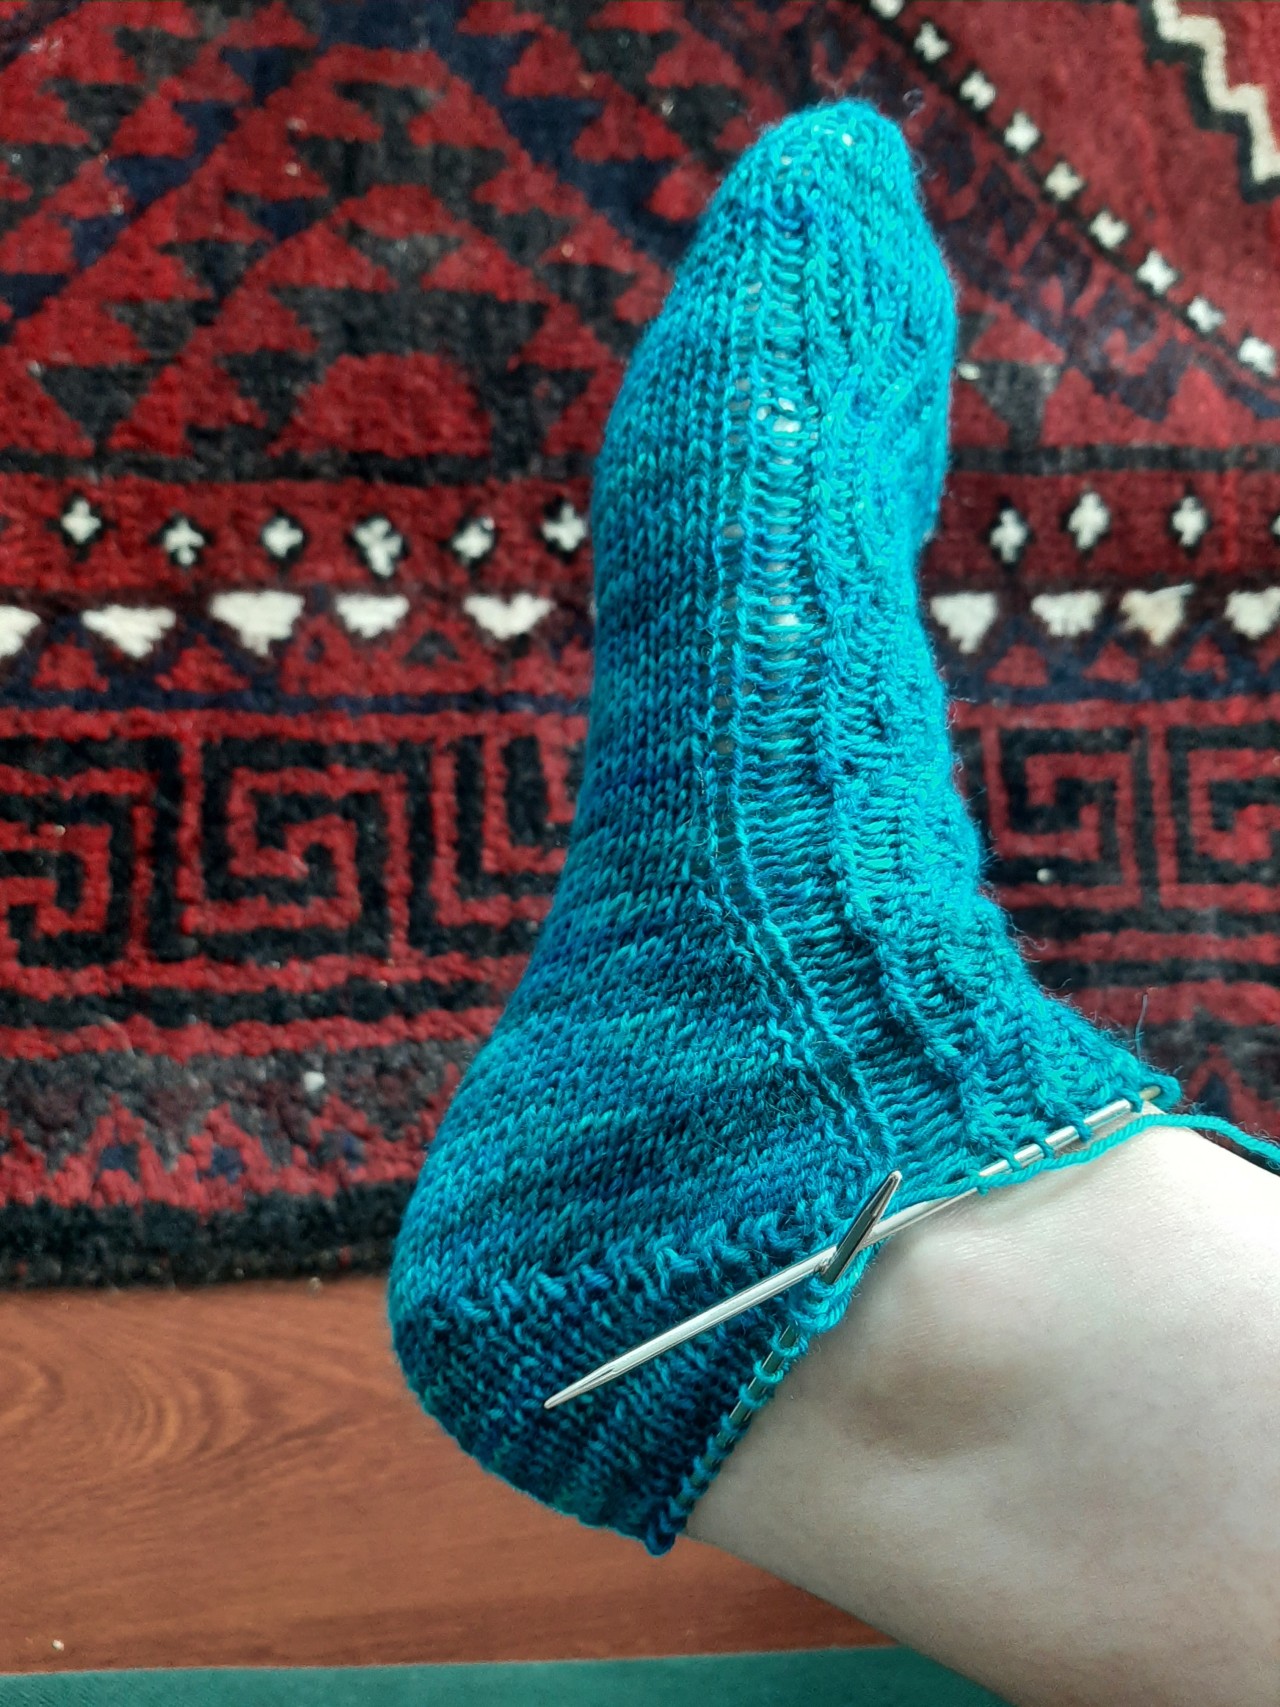 Prevail dessert forlade Koni Knits — My first fleegle heel. I'm considering making a...